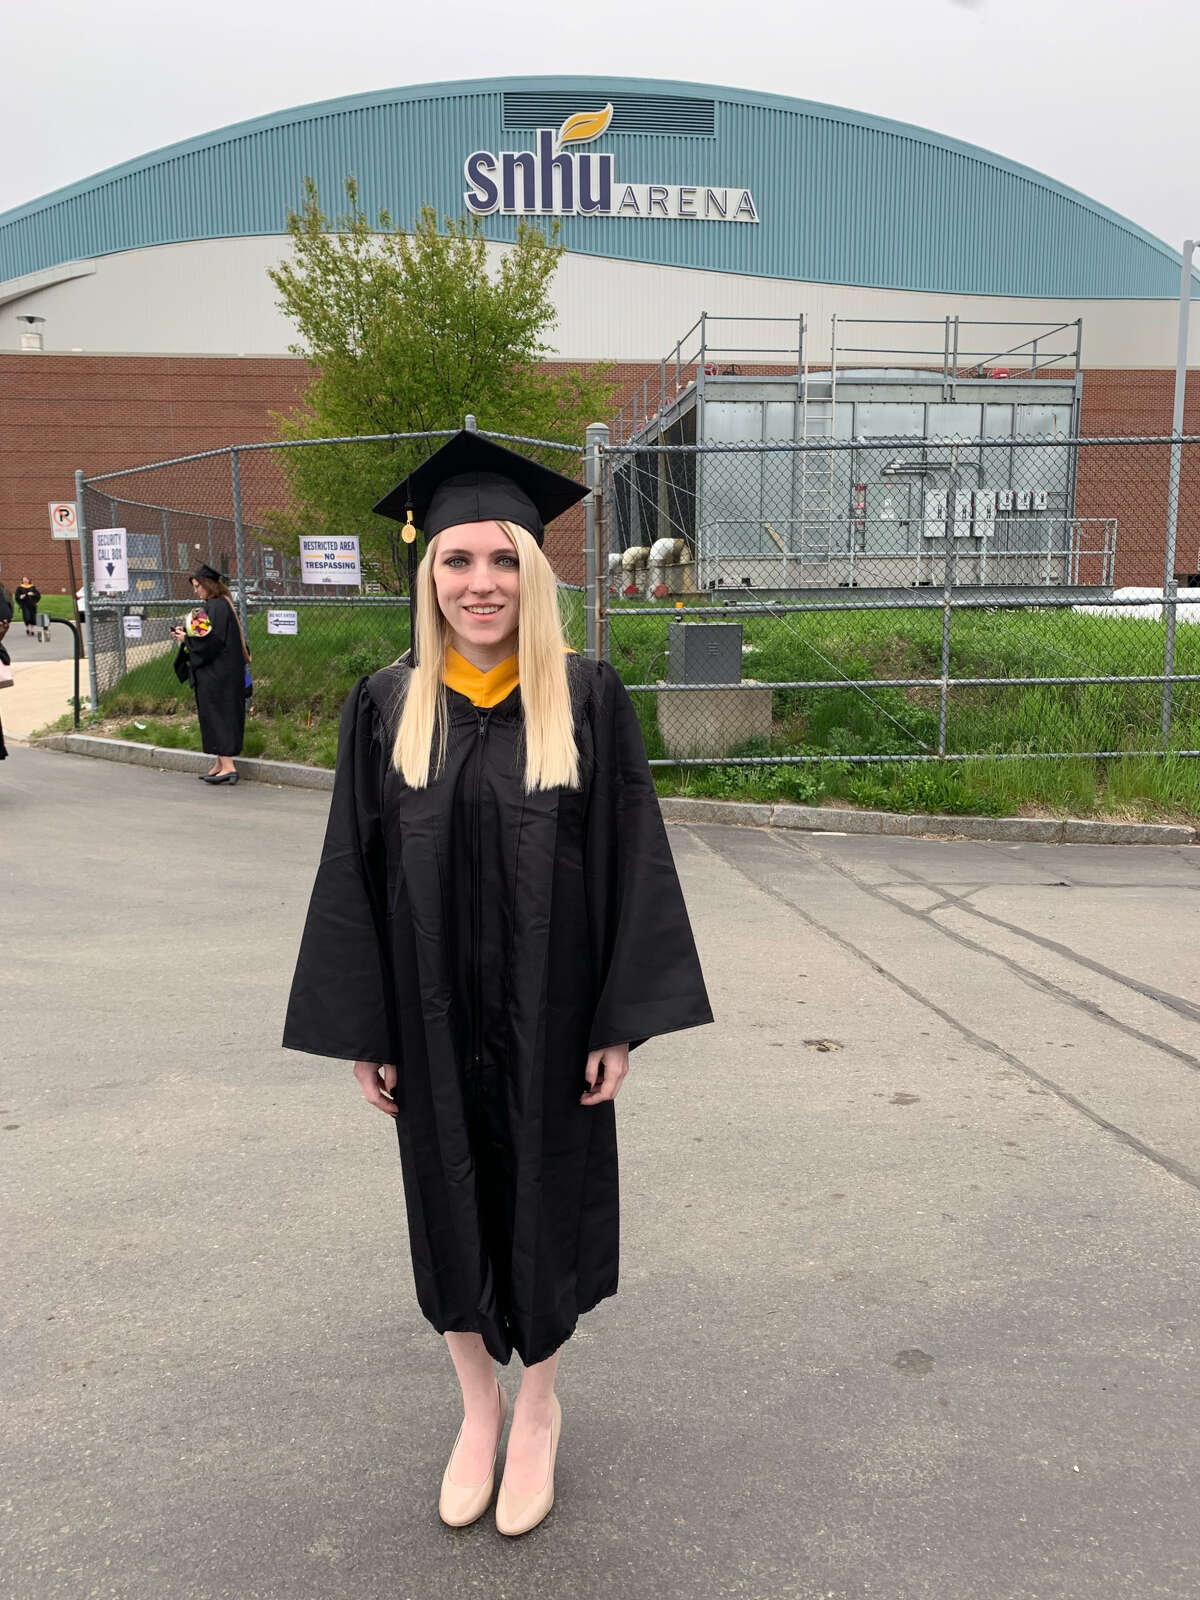 The Capital Region's Kirsten Goddeau graduated from Southern New Hampshire University with a B.S. in Fashion Merchandising and Management. Submitted by JoAnn Goddeau.